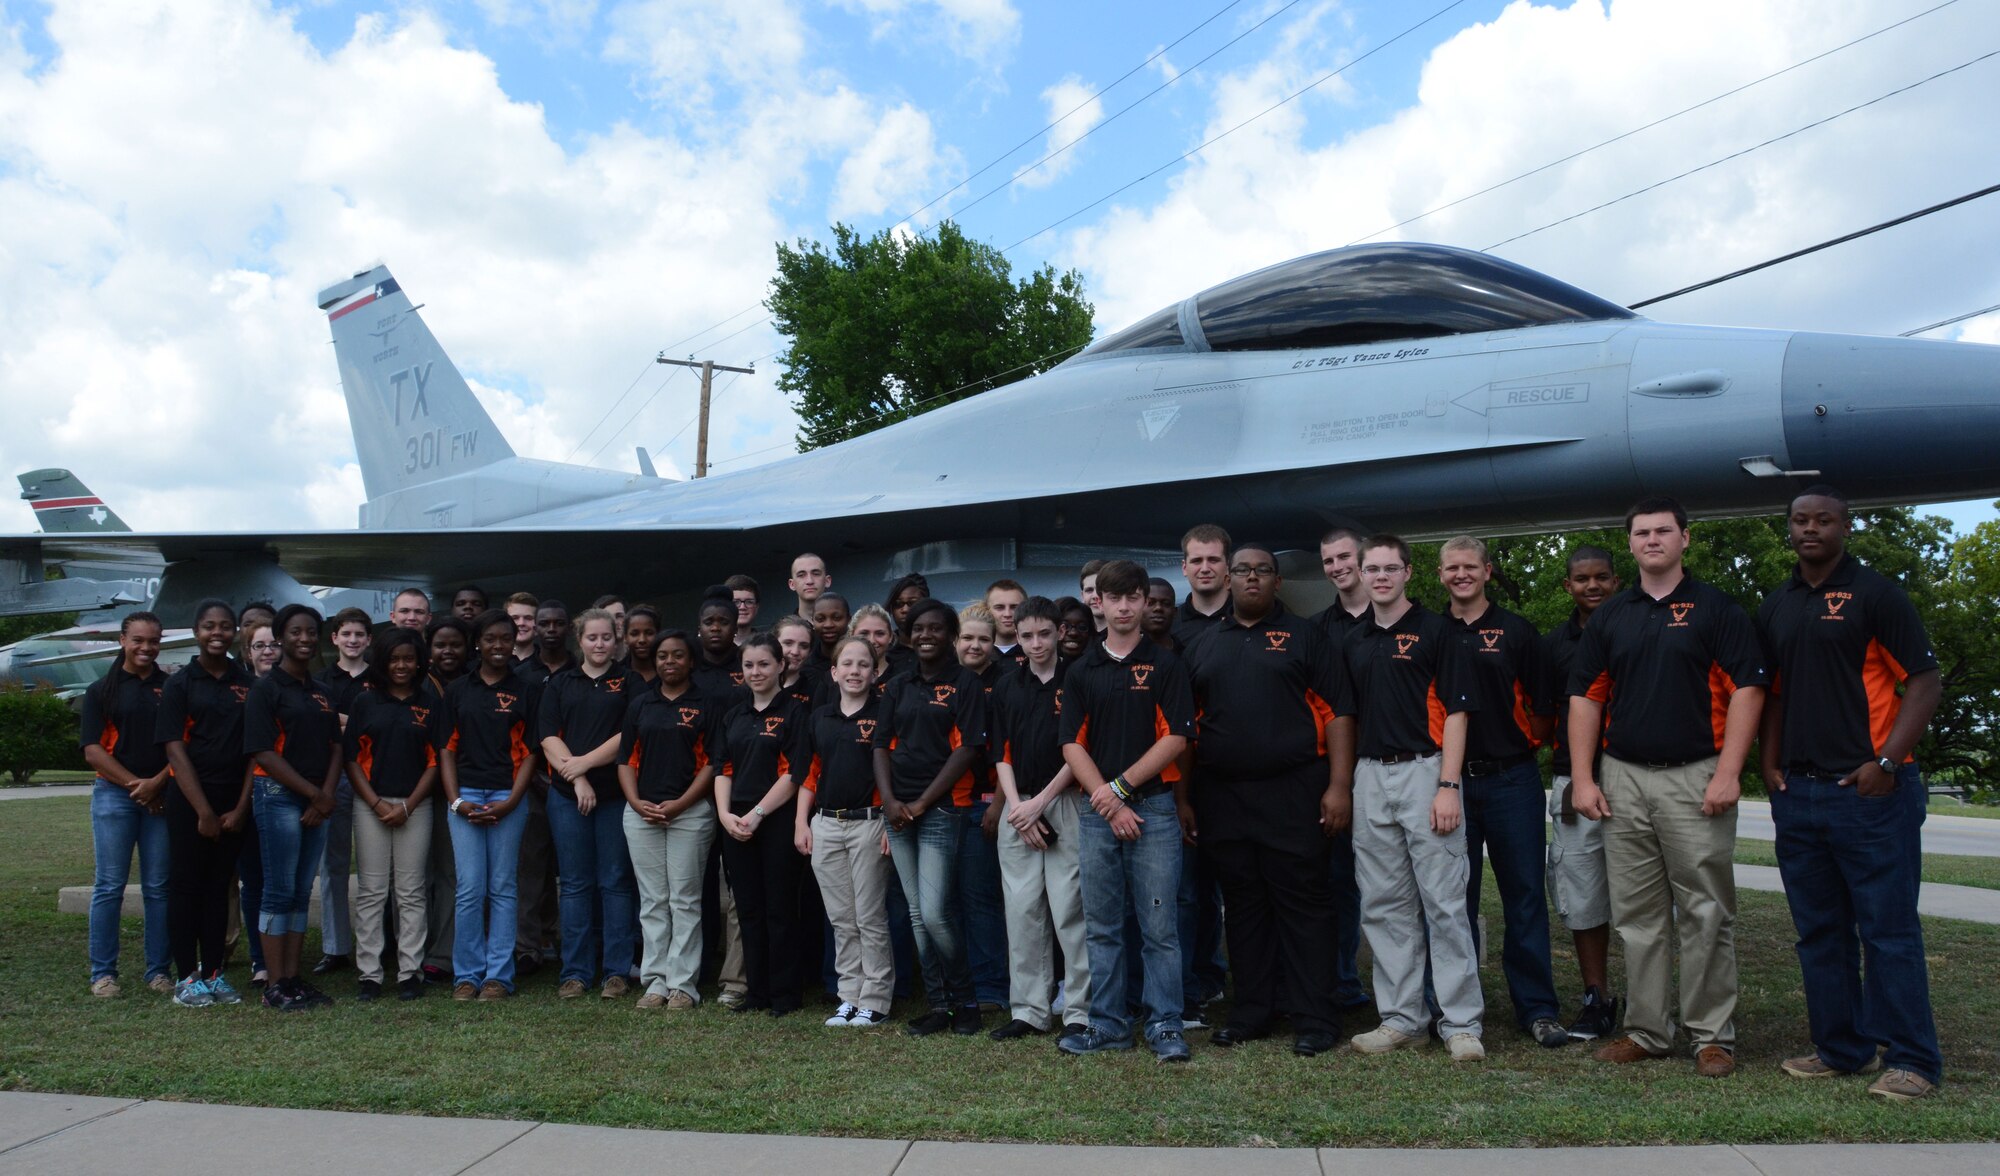 Members of the Junior Reserve Officer Training Corps, Madison Central High School, Madison, Mississippi, stand in front of an F-16 fighter jet static display, May 29, 2014, Naval Air Station Fort Worth Joint Reserve Base, Texas. The students are visiting the 301st Fighter Wing to learn about the different career fields the Air Force has to offer. (U.S. Air Force photo by Staff Sgt. Samantha A. Mathison)